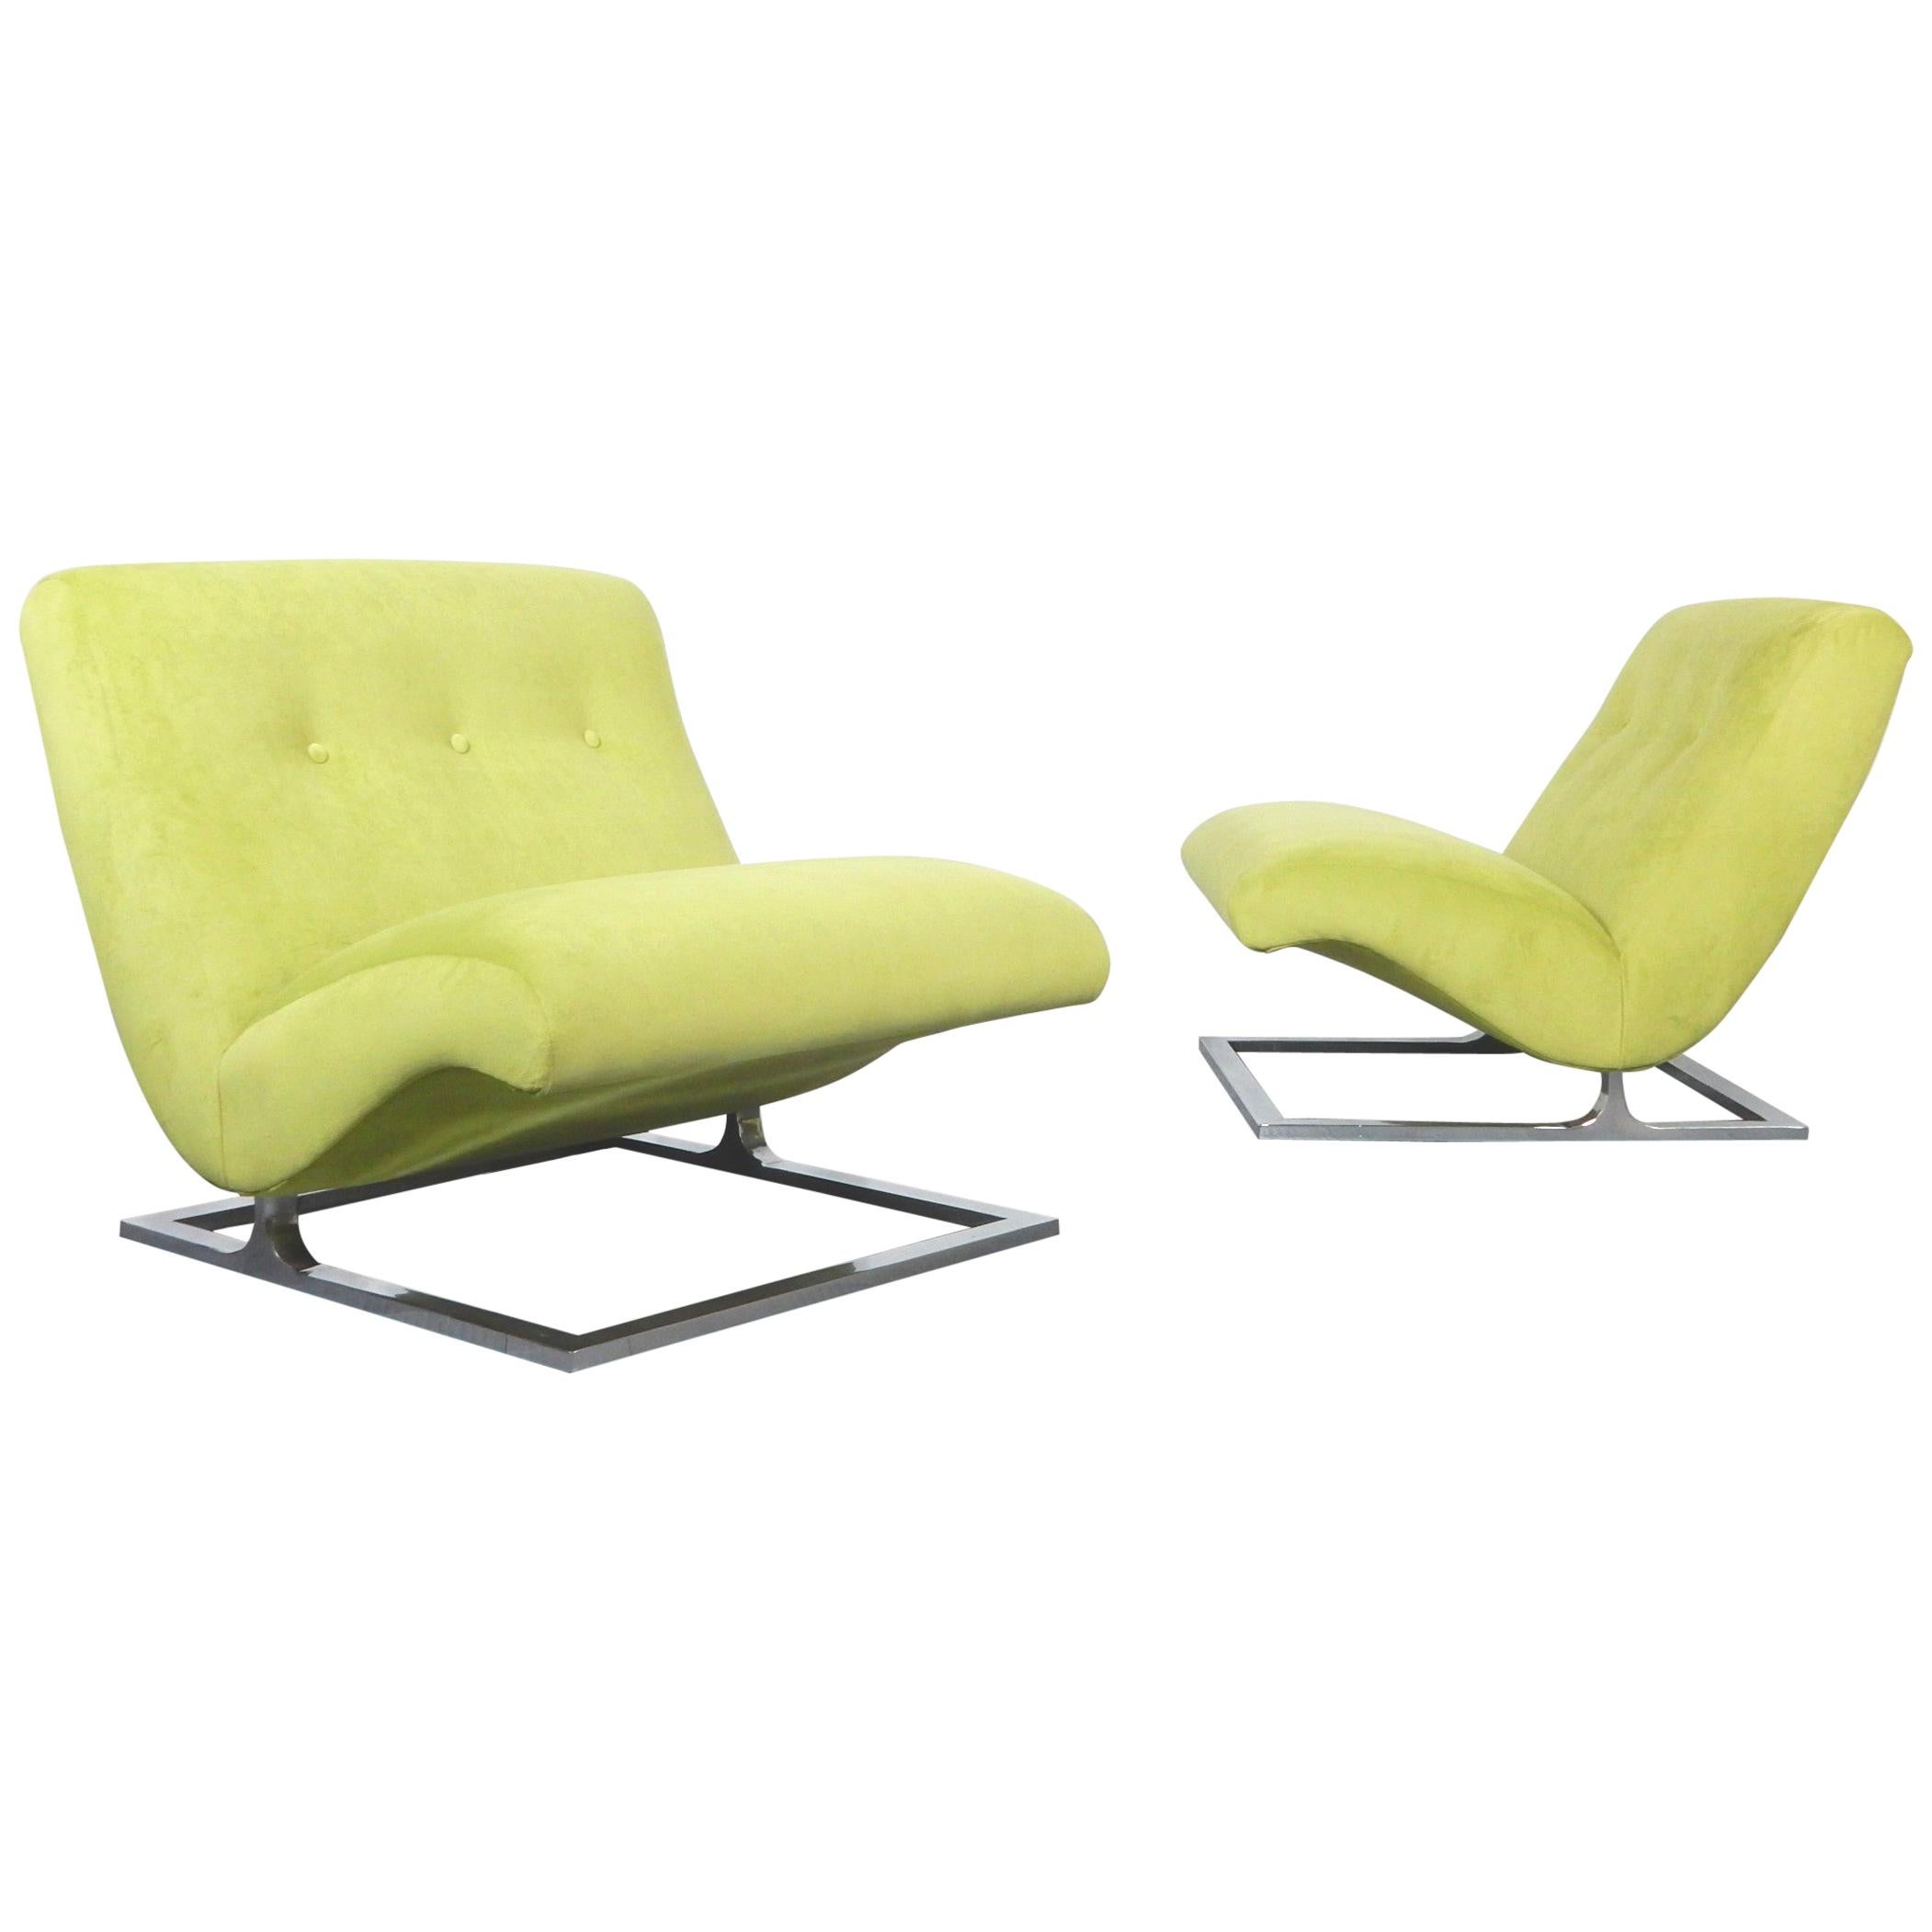 Vintage Scoop Cantilever Lounge Chairs 1970's For Sale